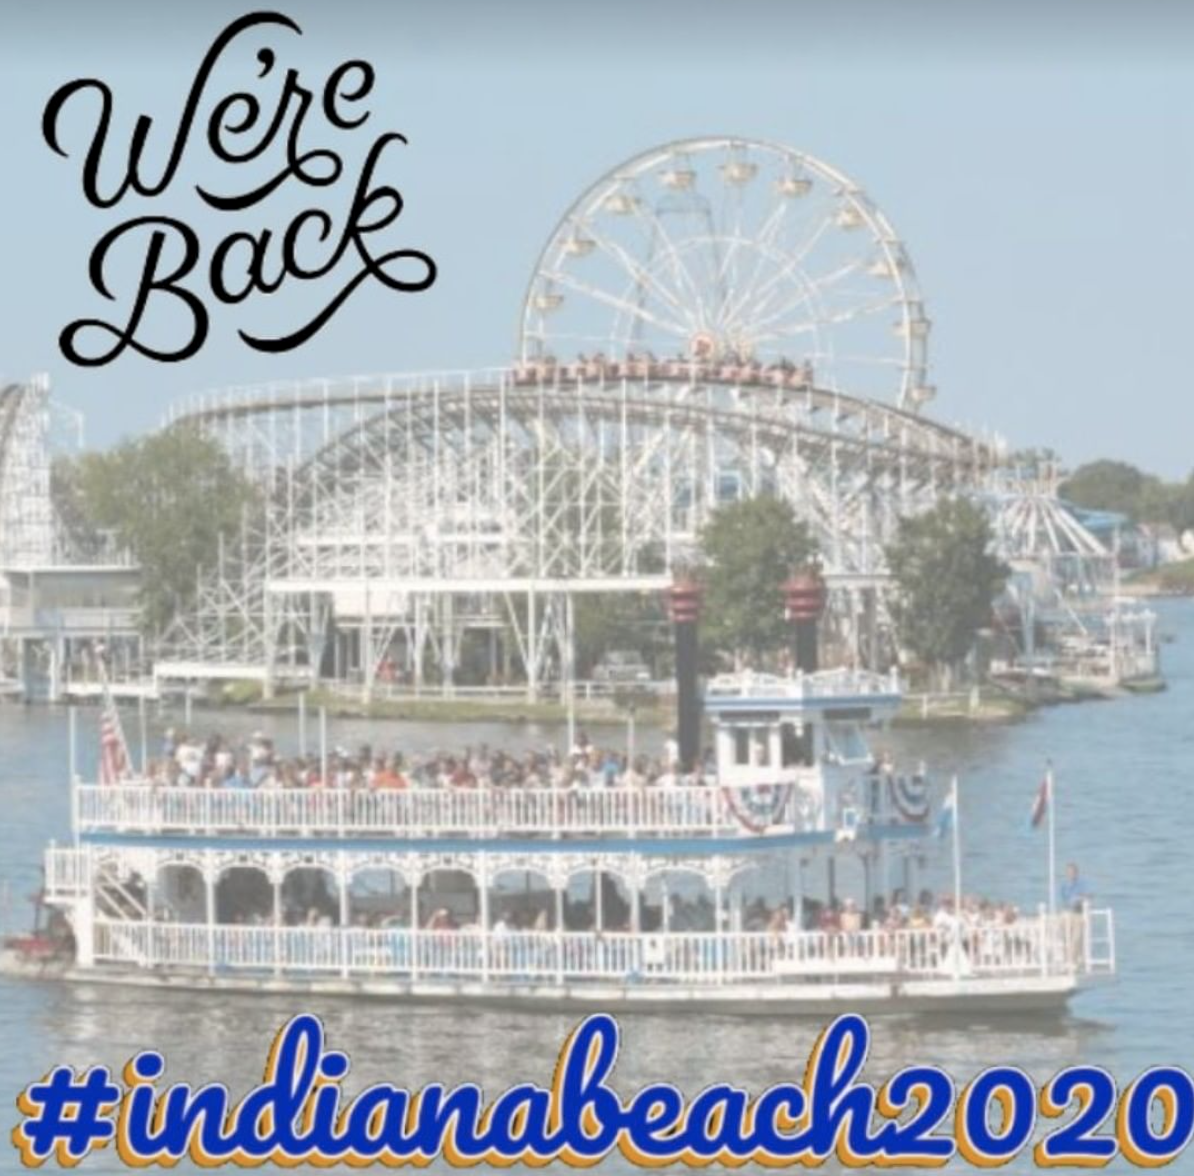 Indiana Beach's "We're Back" Instagram post